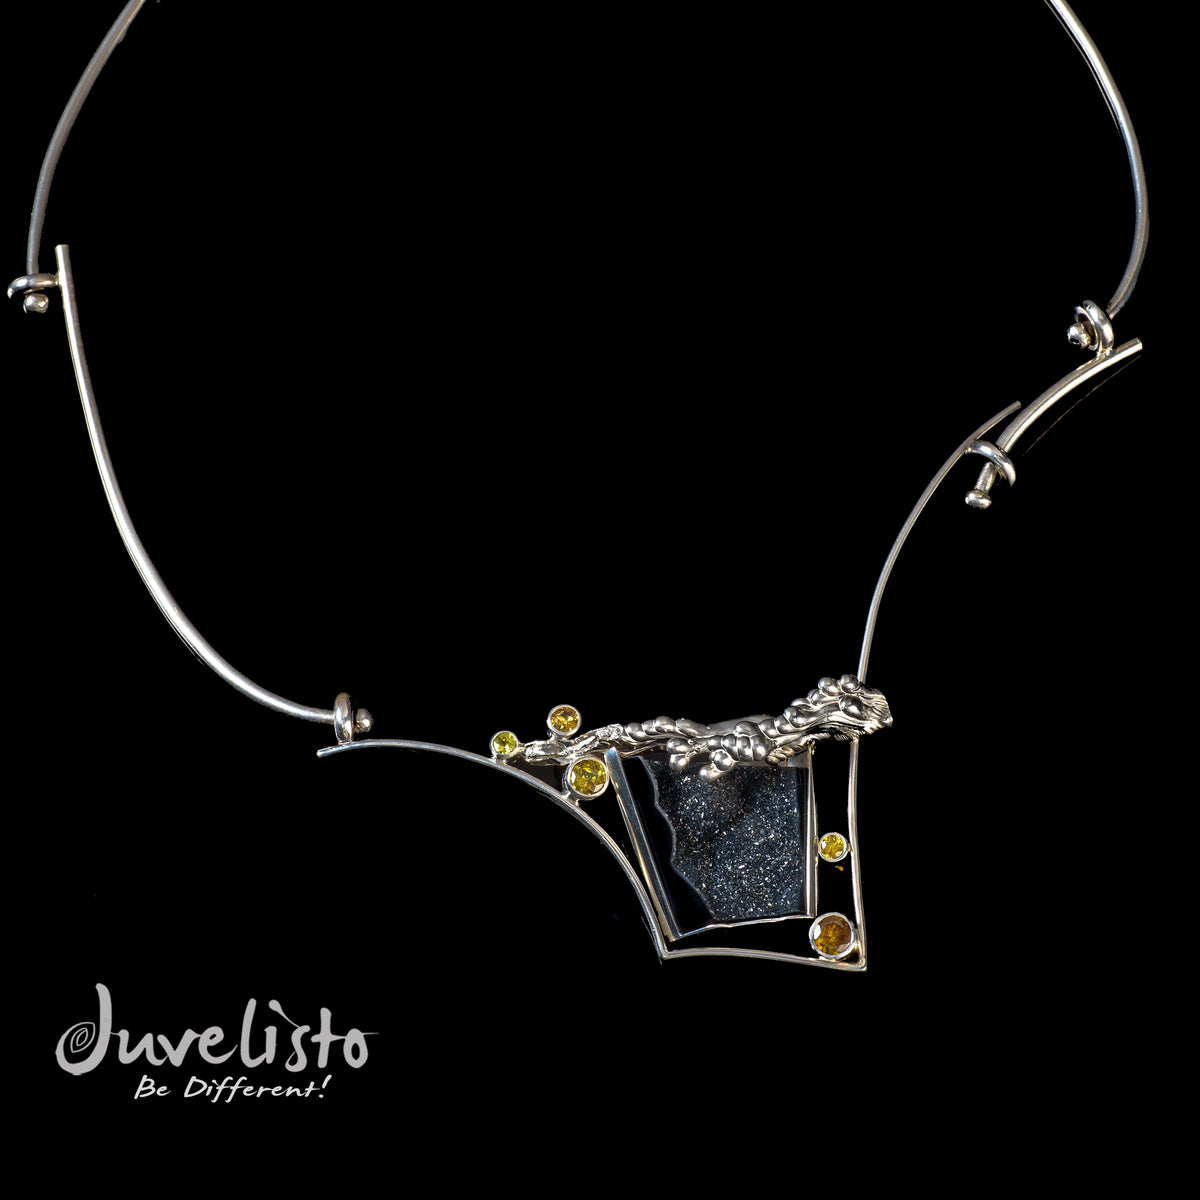 Juvelisto Design Asymmetrical Silver Necklace with Sphenes and Black Agate Druzy